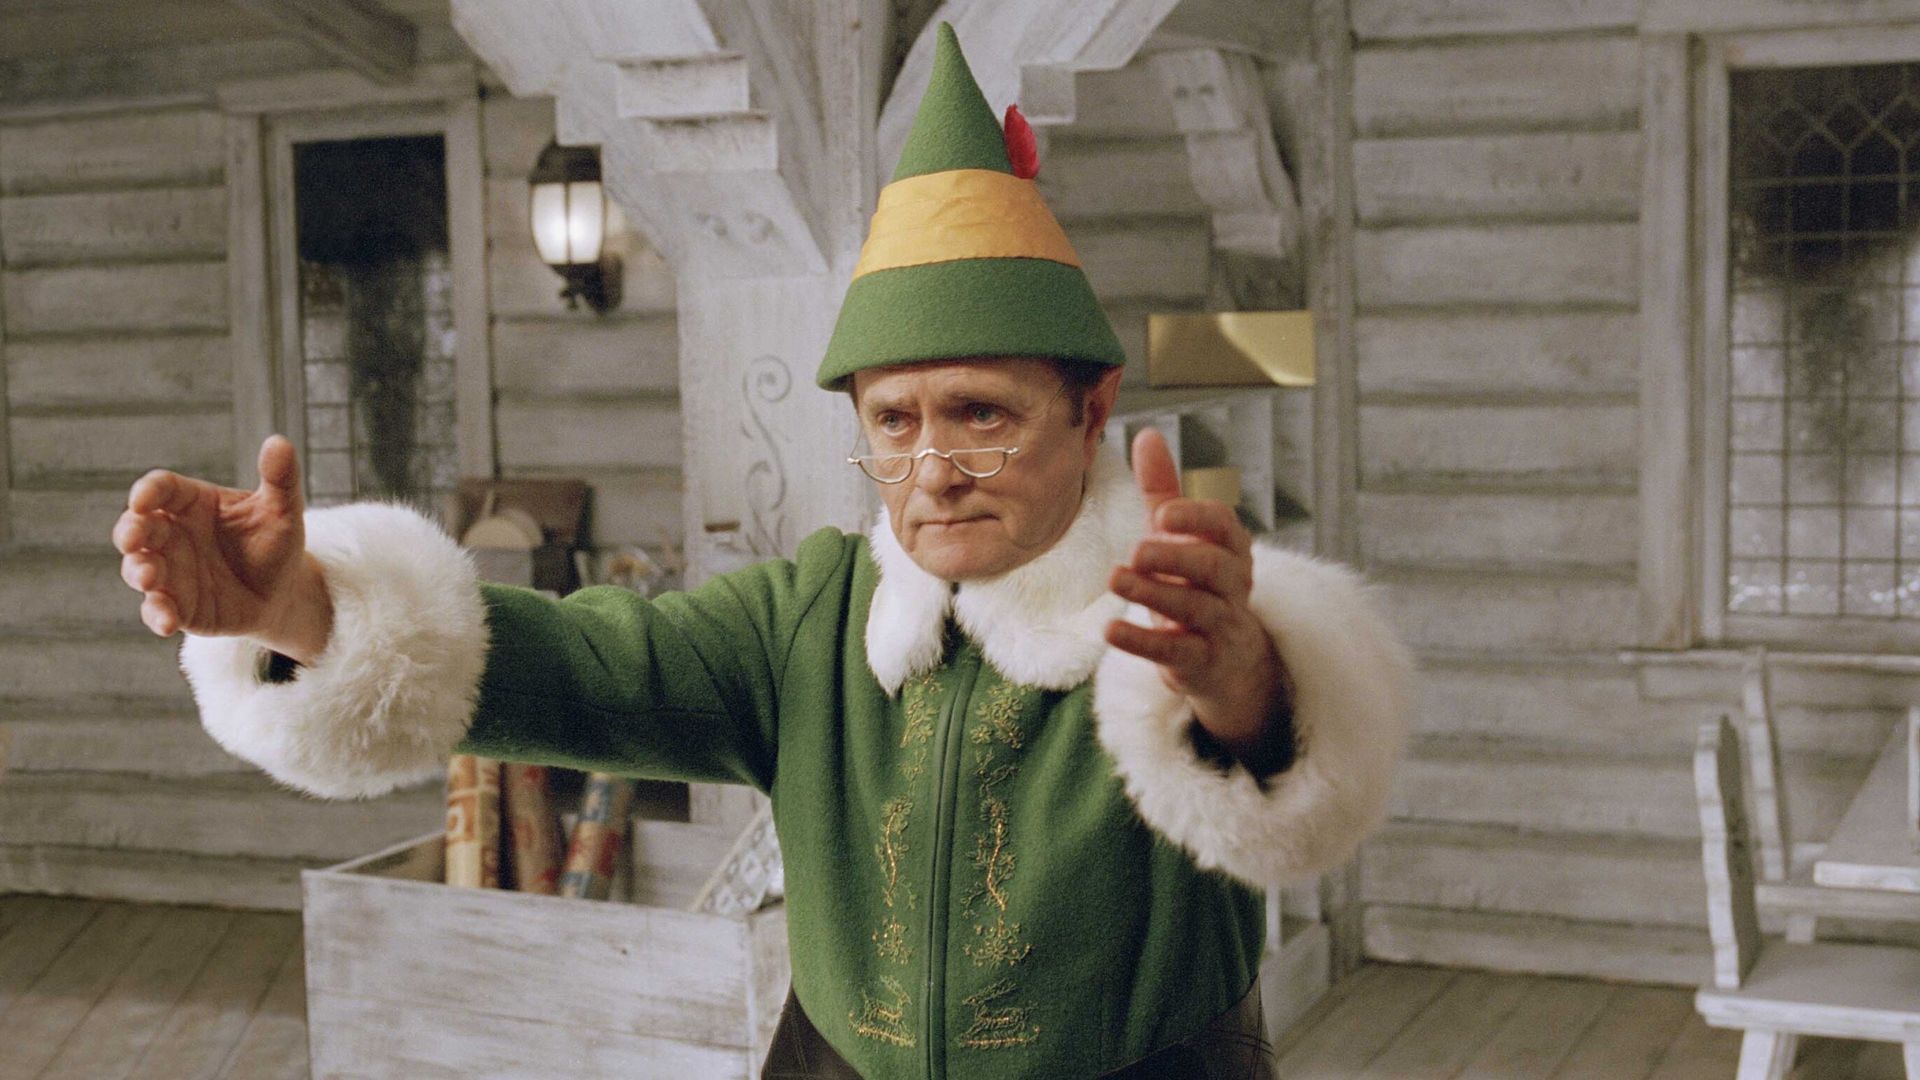 Actor known for roles in Elf and The Big Bang Theory dies